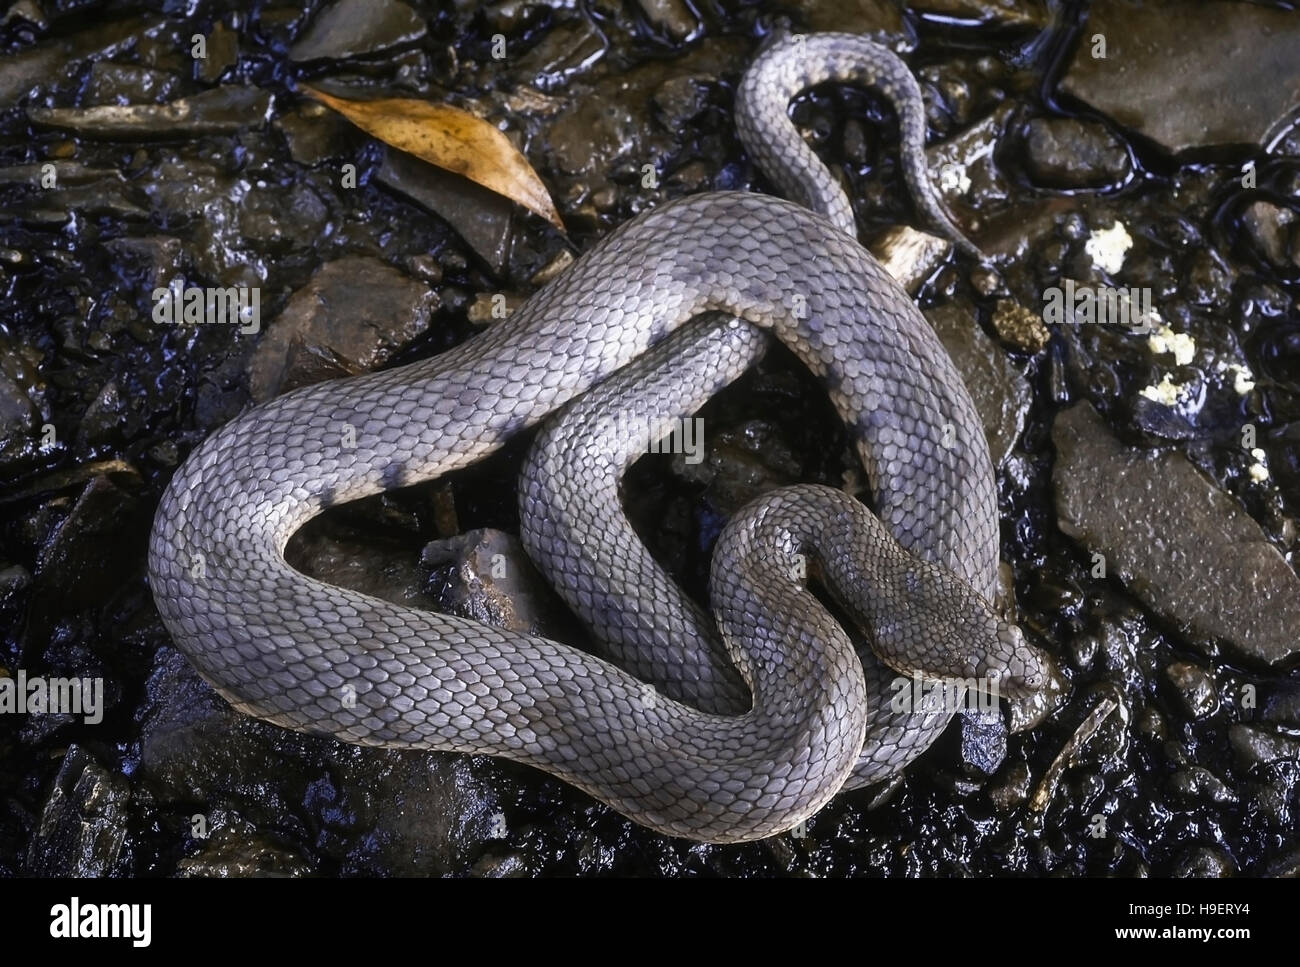 Cerberus rhynchops DOG-FACED WATER SNAKE. Shows adult about to moult. Photographed near Mumbai (Bombay) Maharashtra, INDIA. Stock Photo